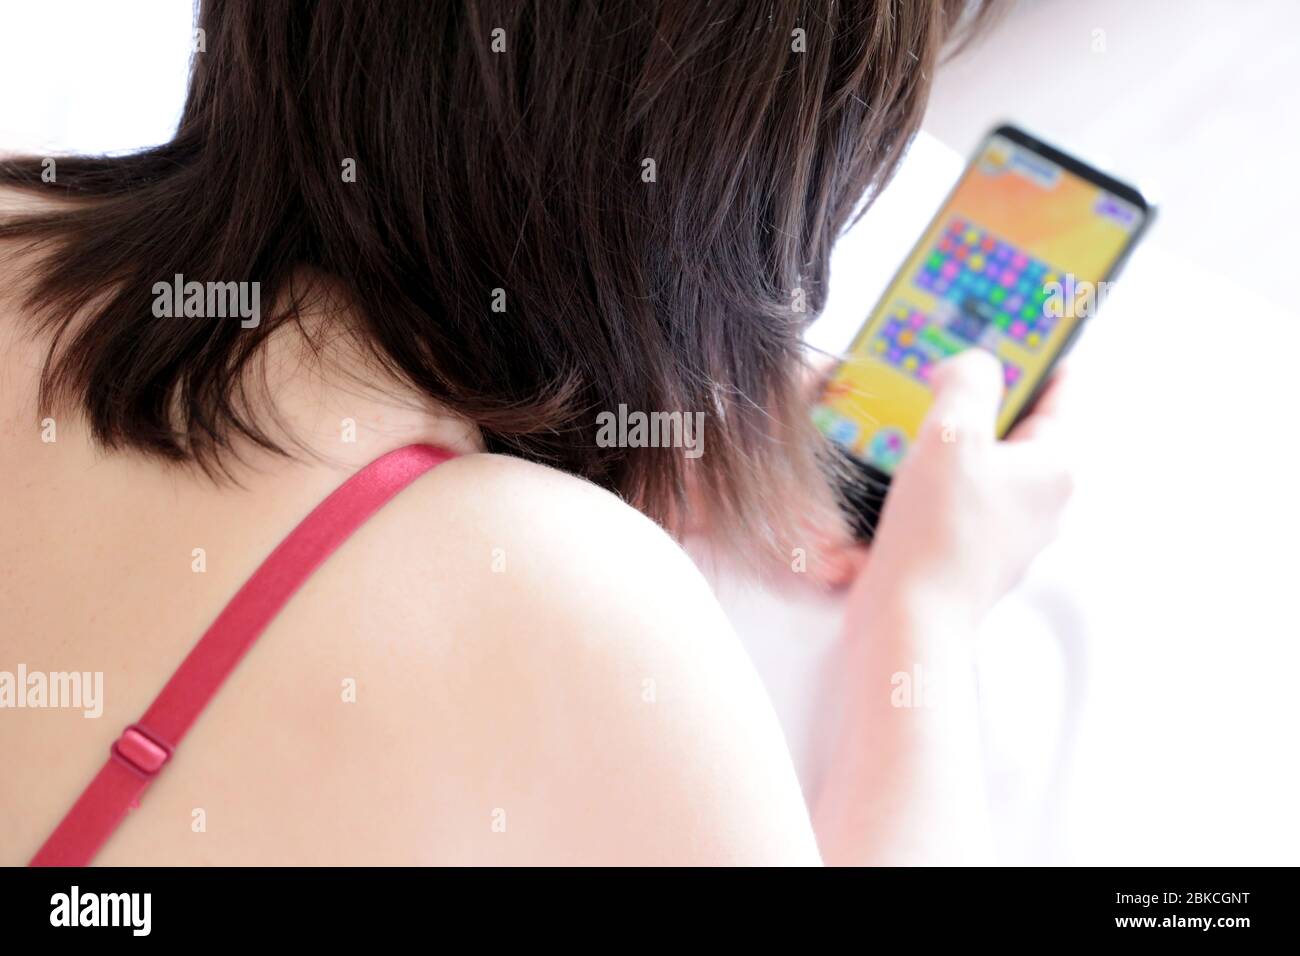 Girl playing casual game on smartphone. Mobile phone in female hand, concept of social media, gaming addiction Stock Photo